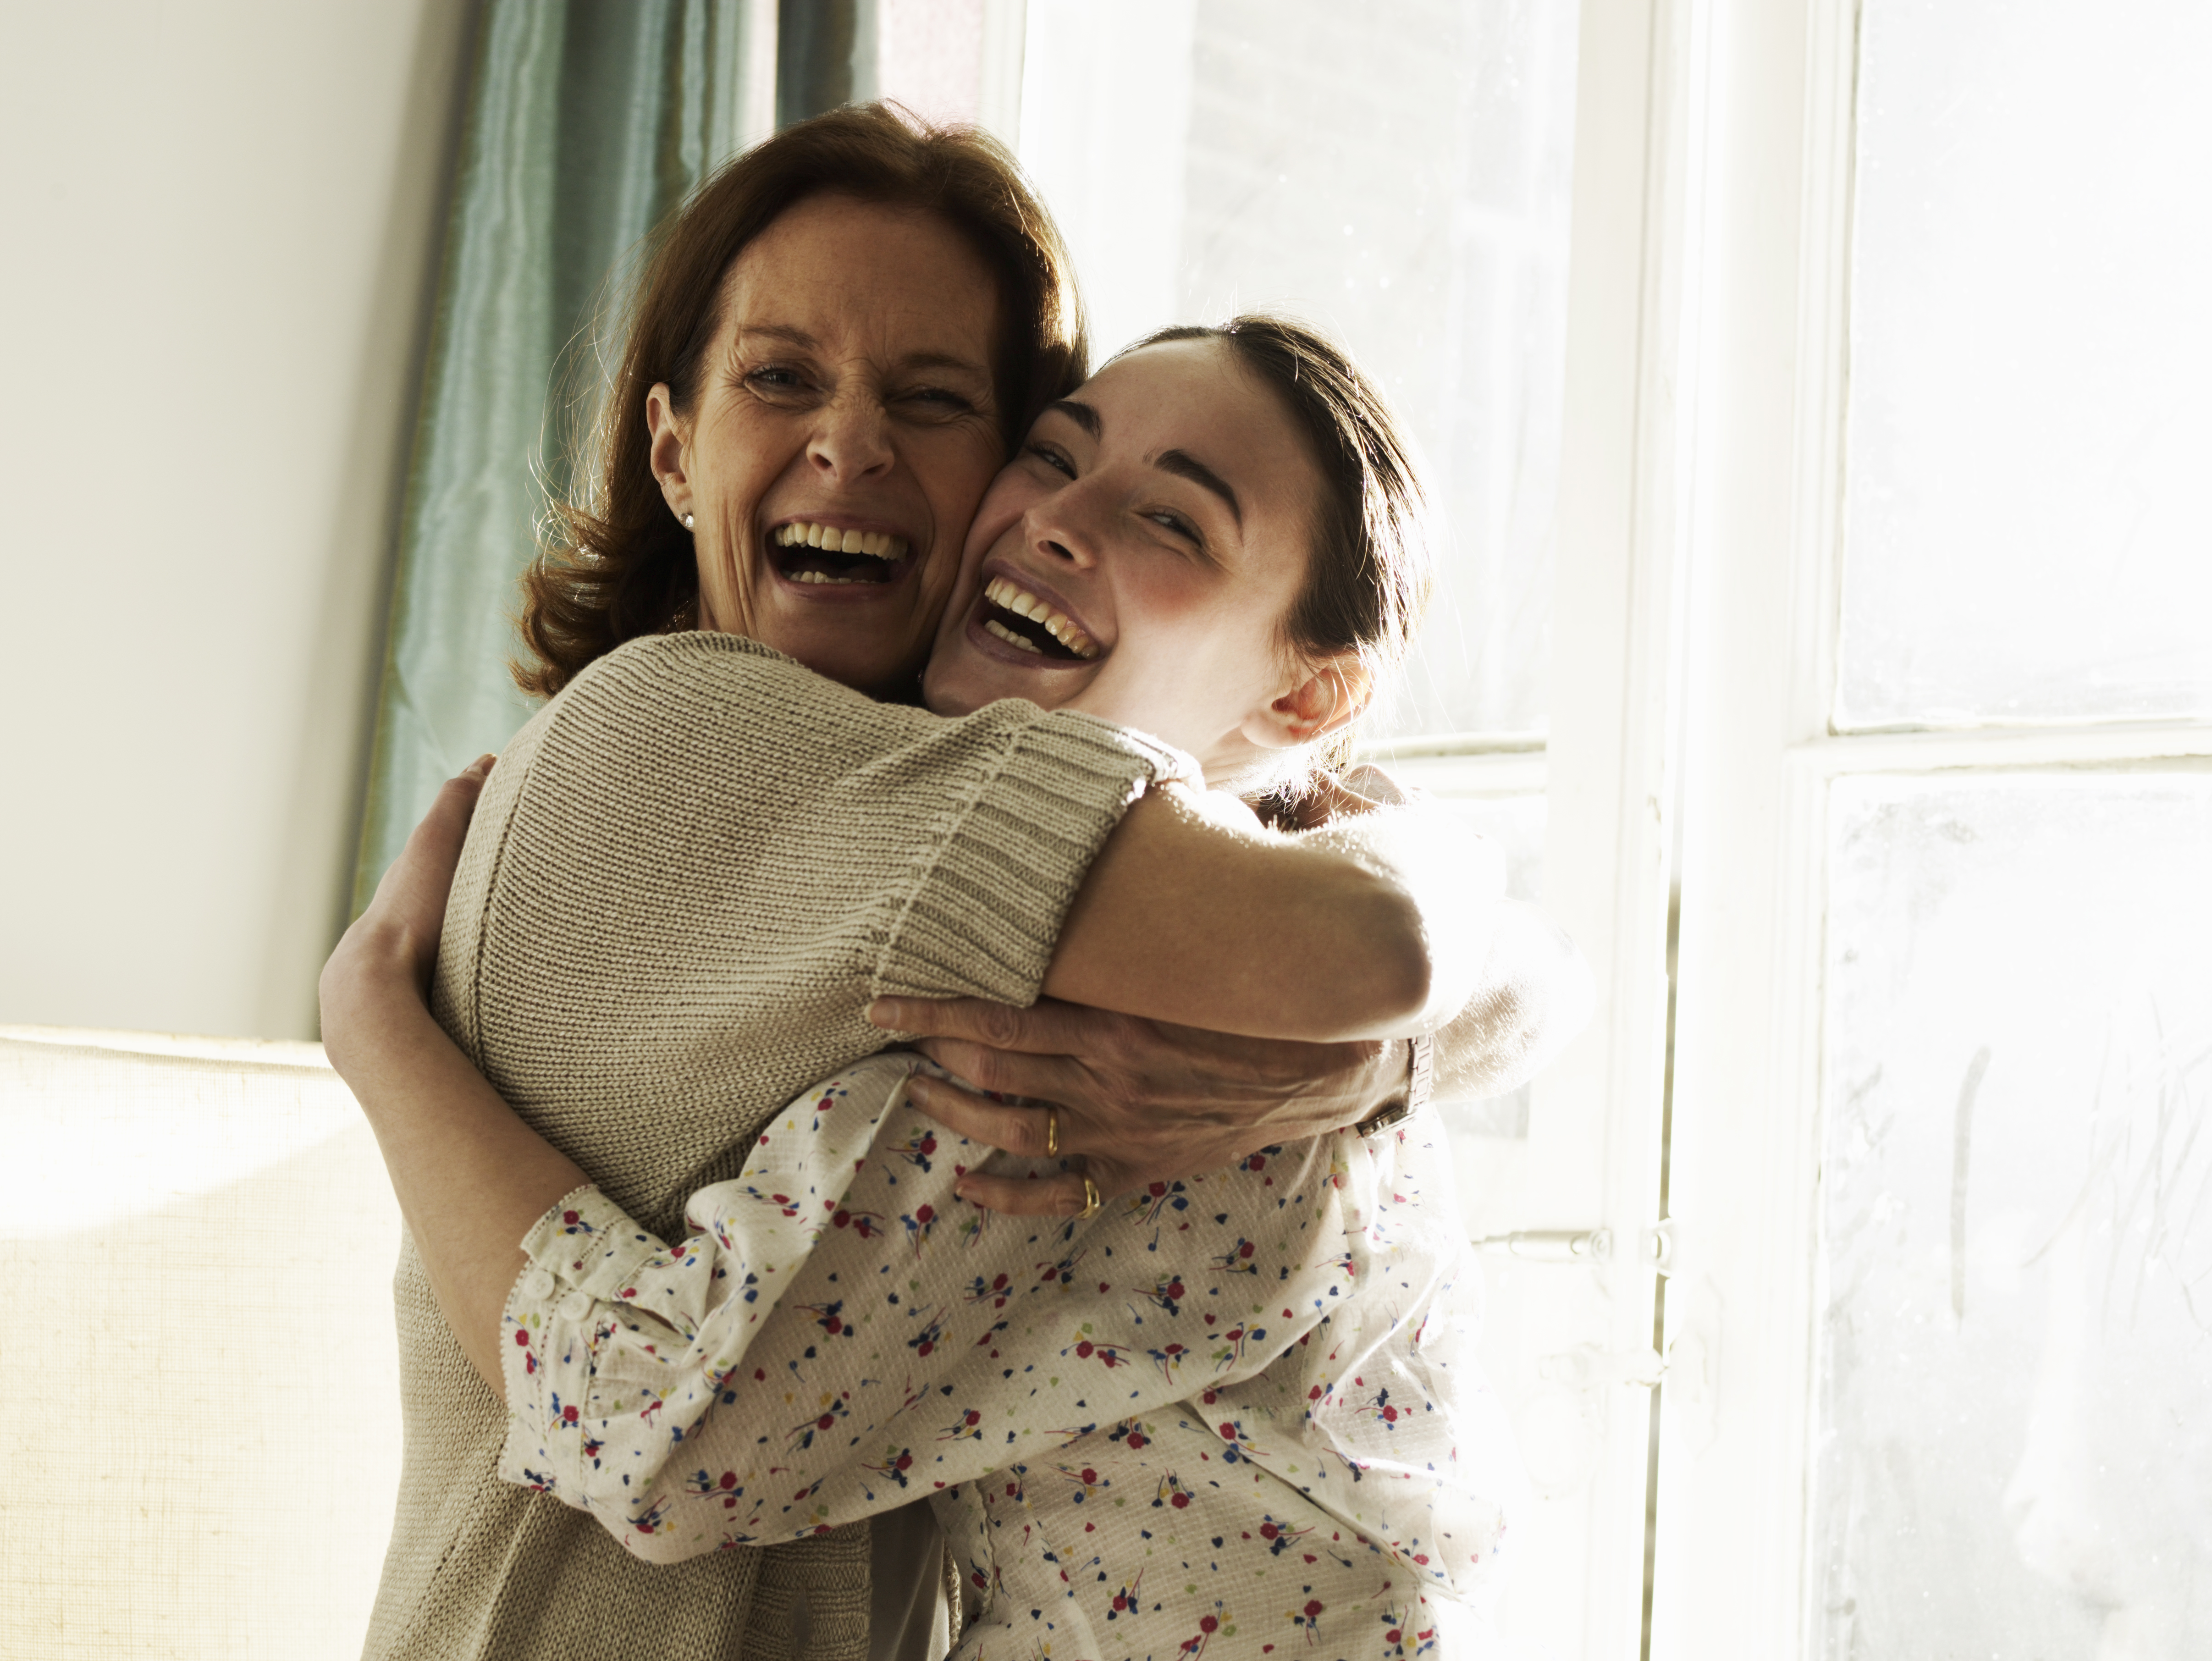 A mother and daughter hugging | Source: Getty Images